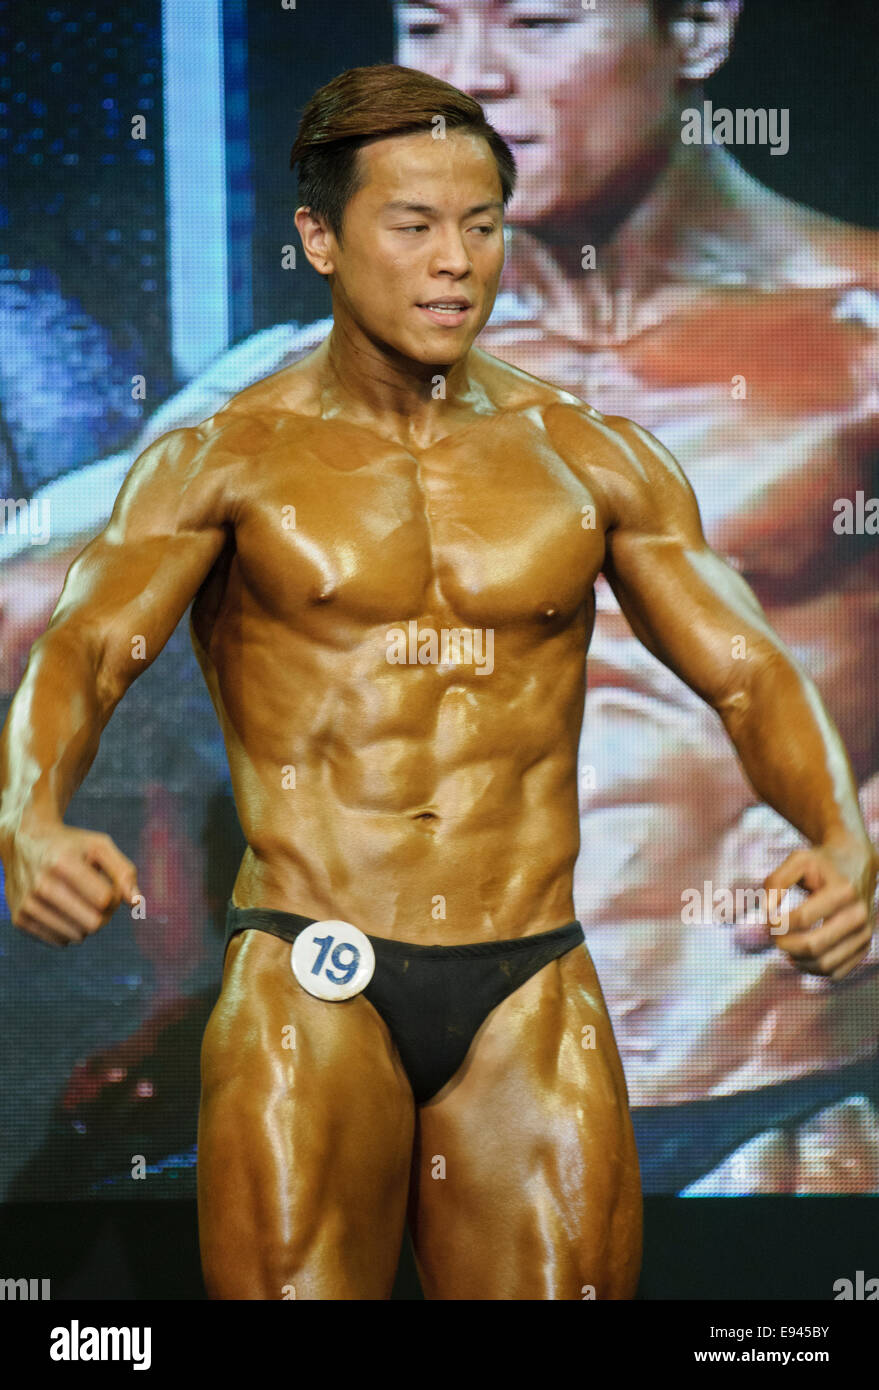 Body building competition at the Central World Bangkok, Thailand Stock Photo